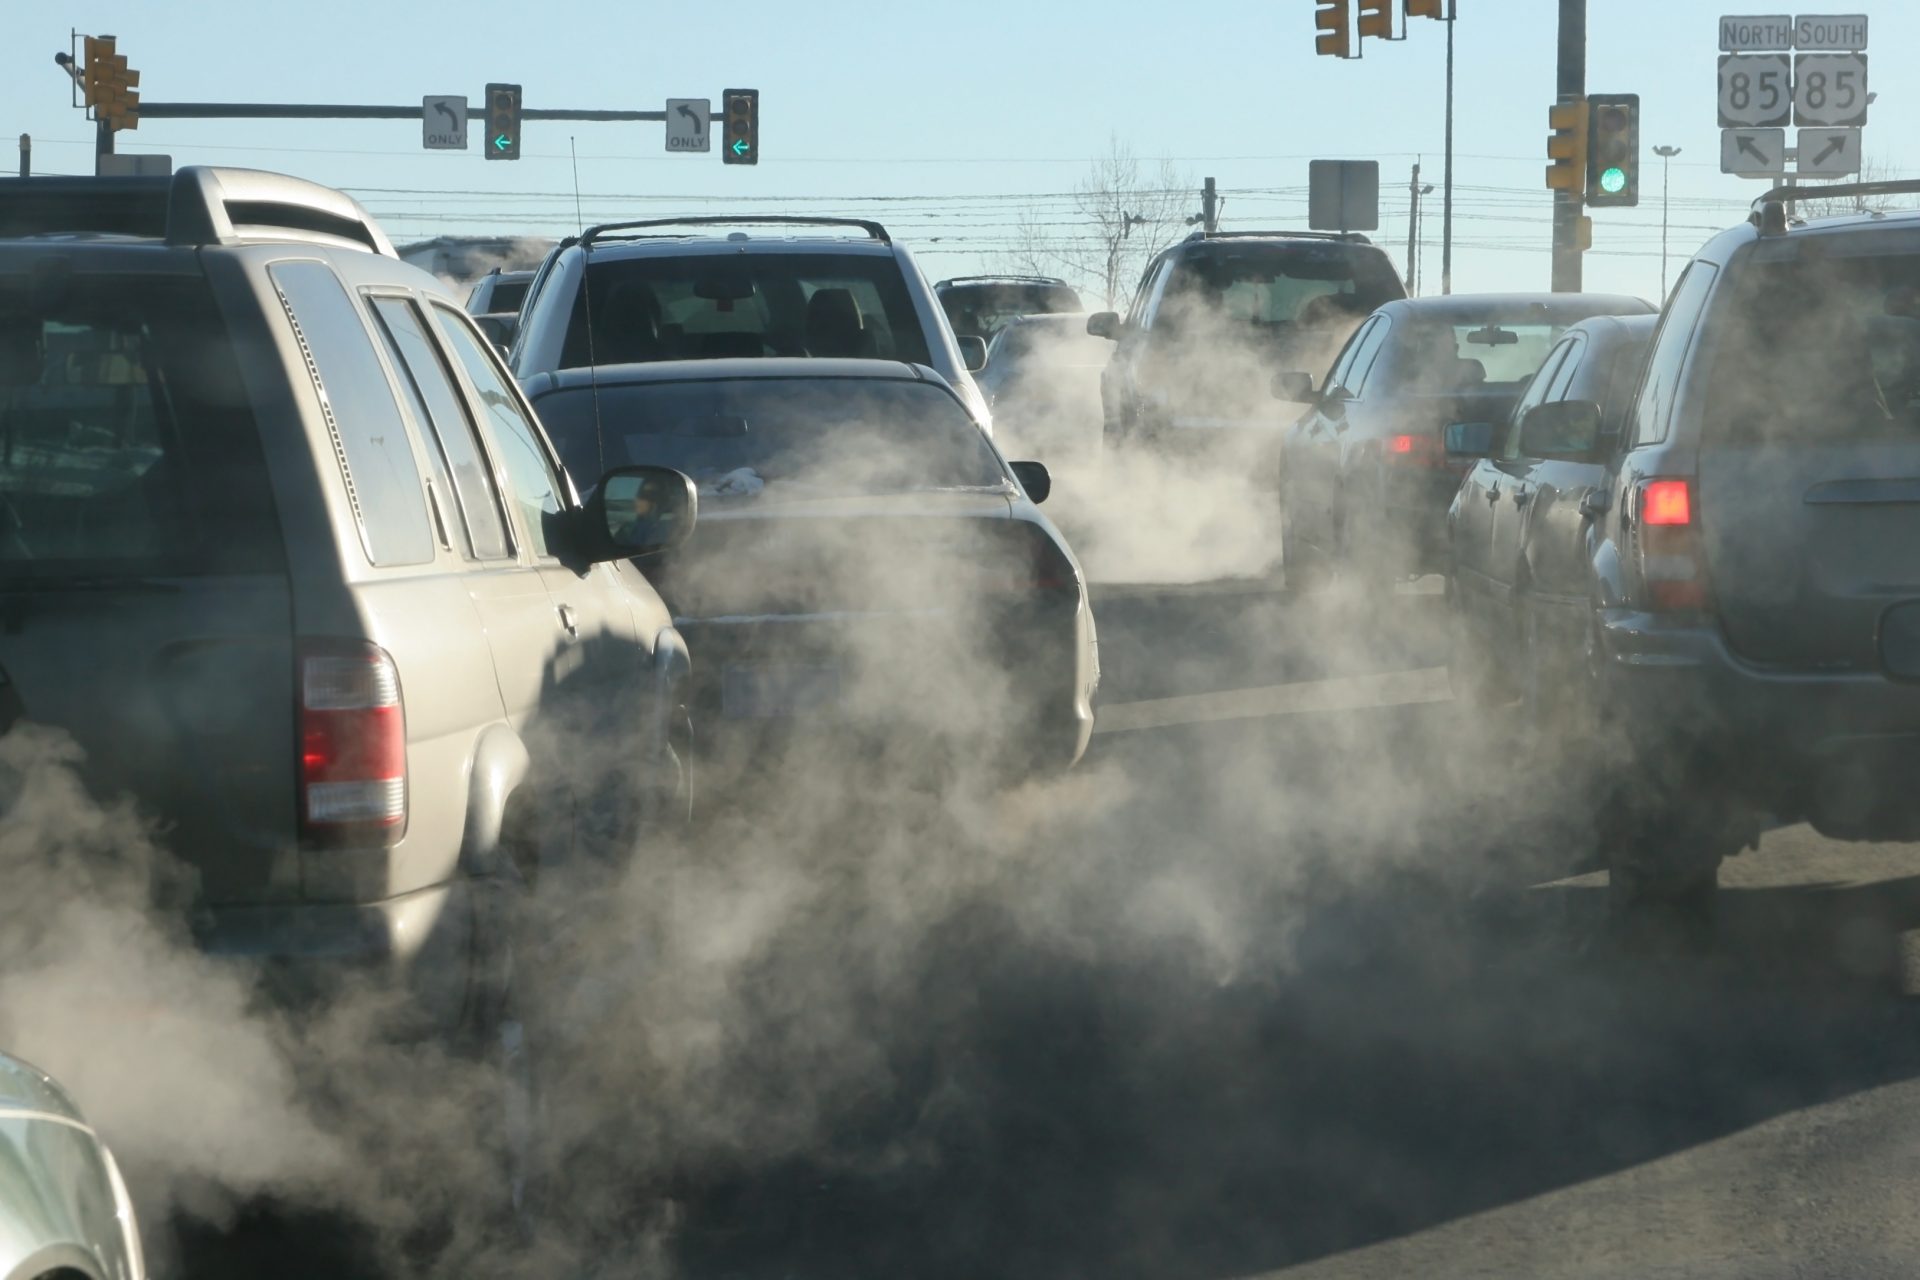 You might be surprised to learn which part of vehicles is the worst for our planet